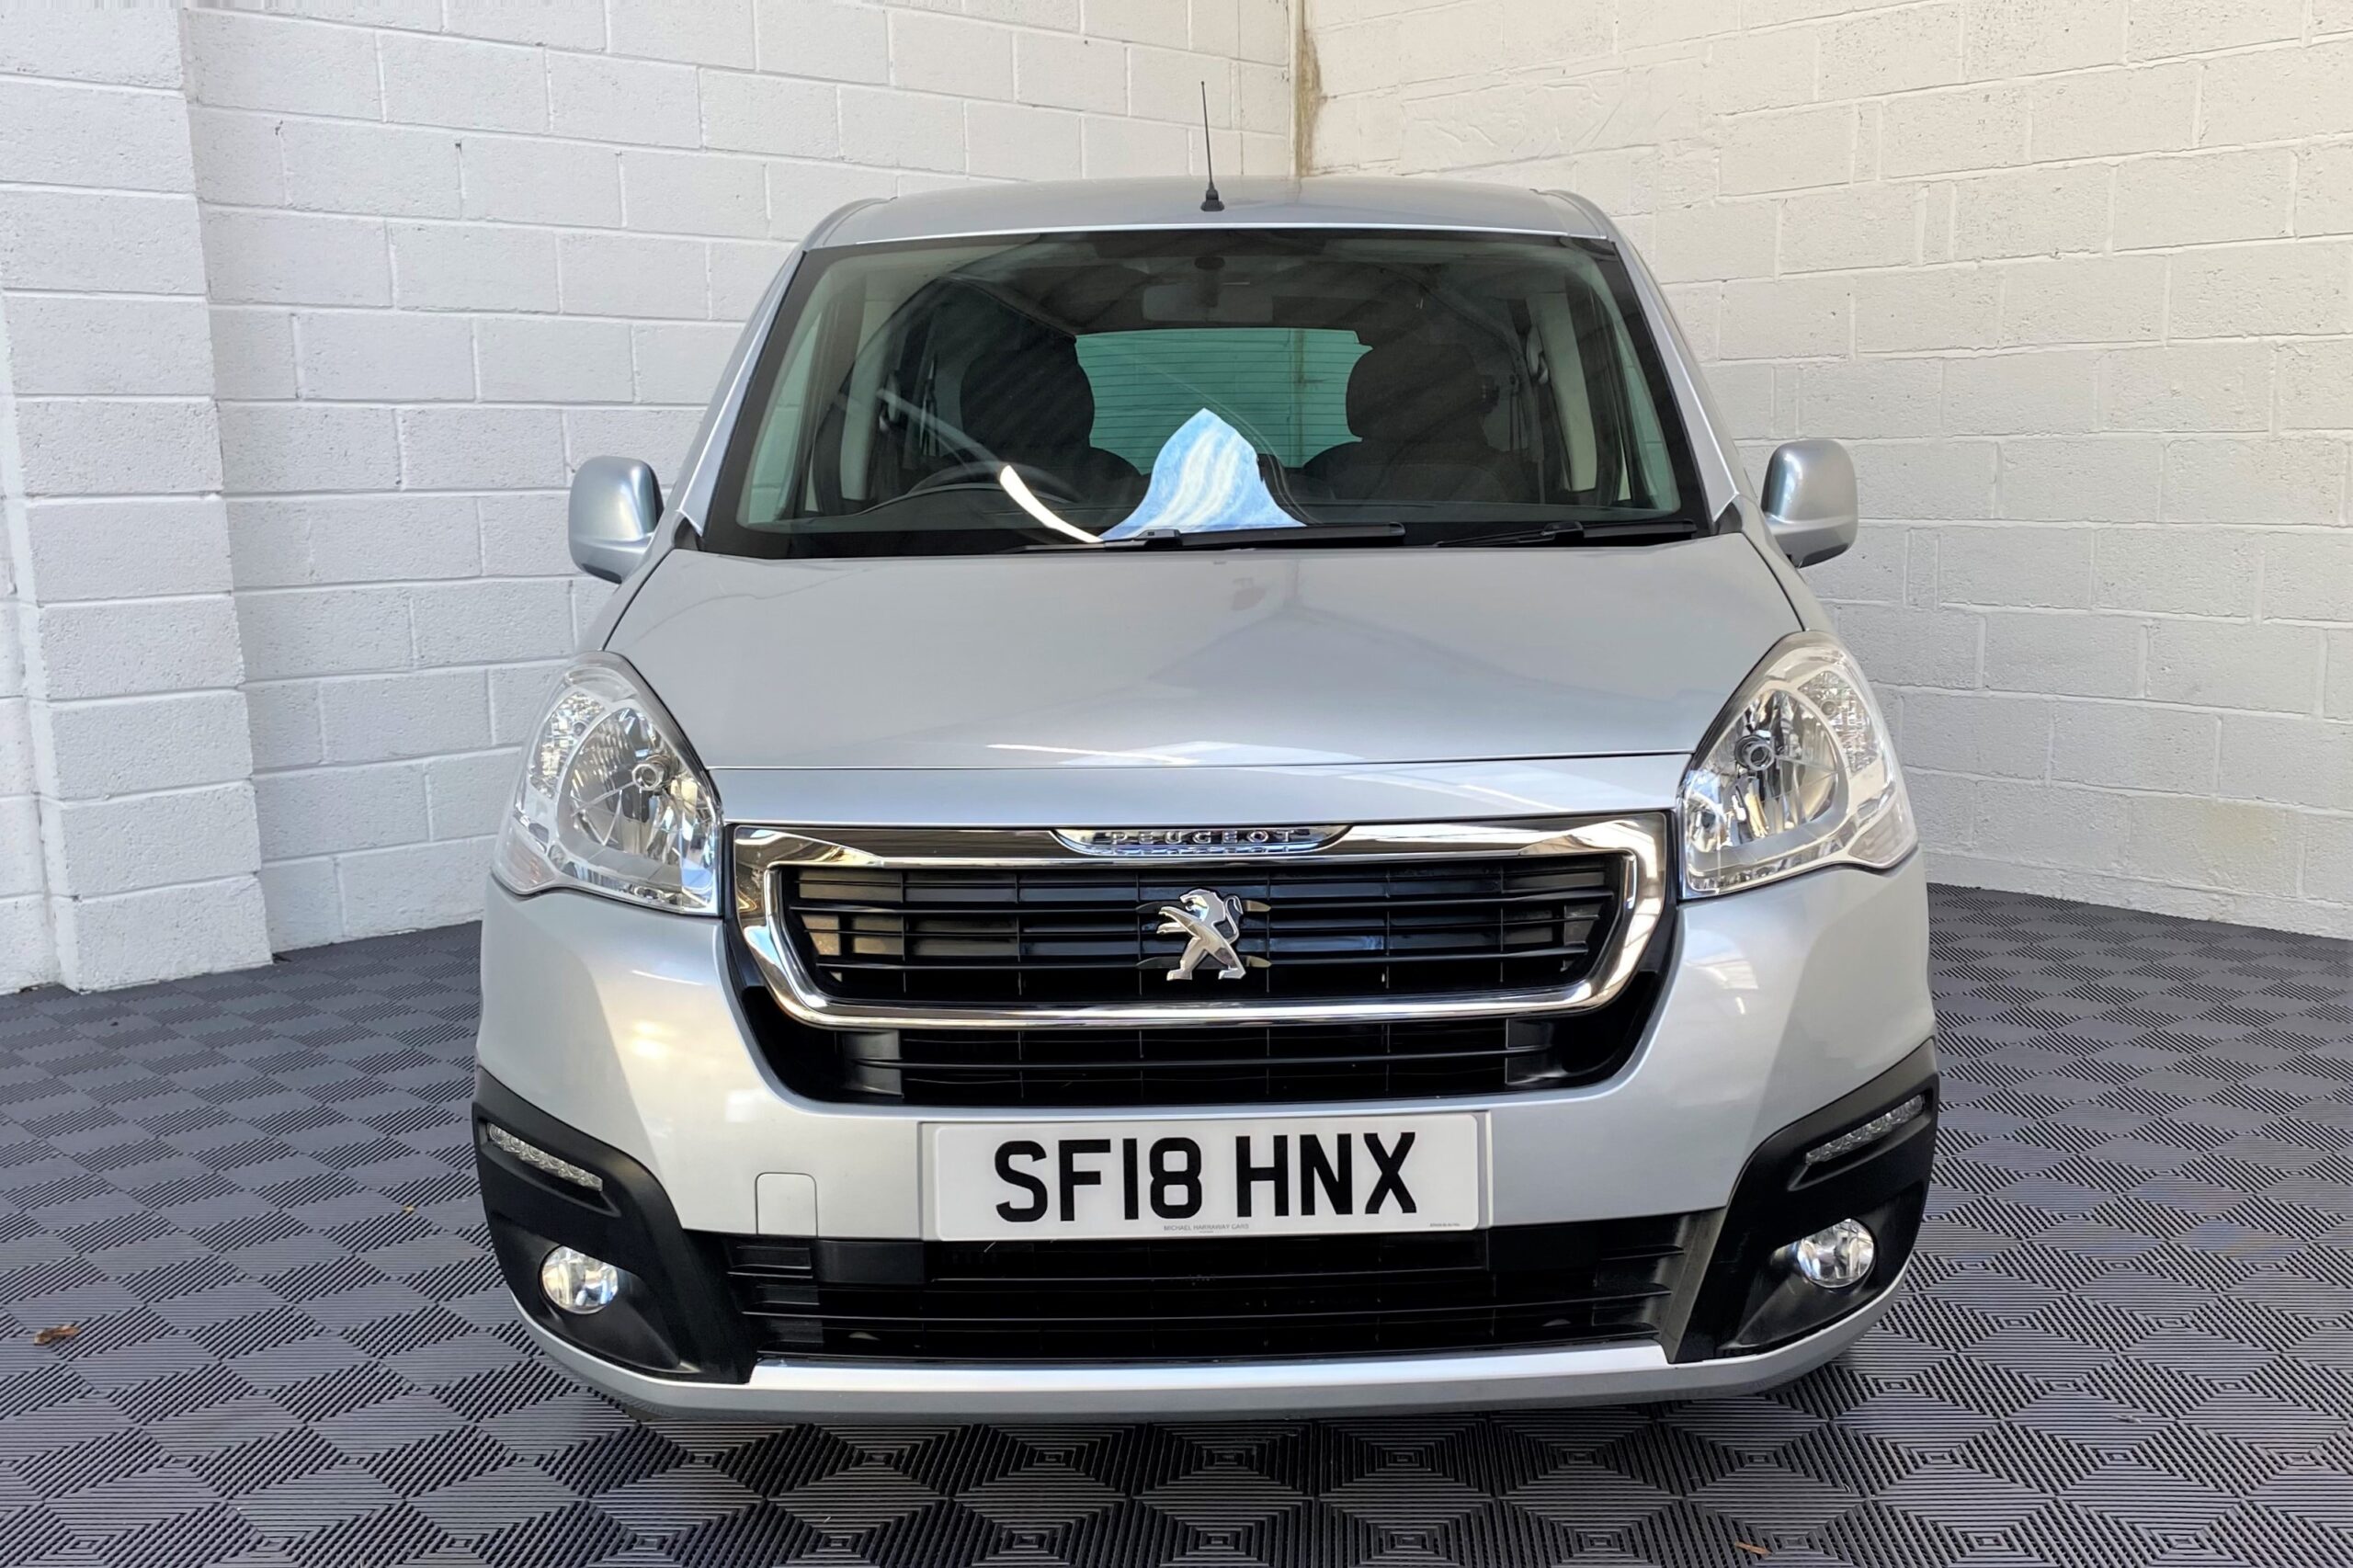 Used Peugeot Partner WAV Cars For Sale Bristol Wheelchair Accessible Vehicles Used For Sale Somerset Devon Dorset Bath SF18 HNX 4